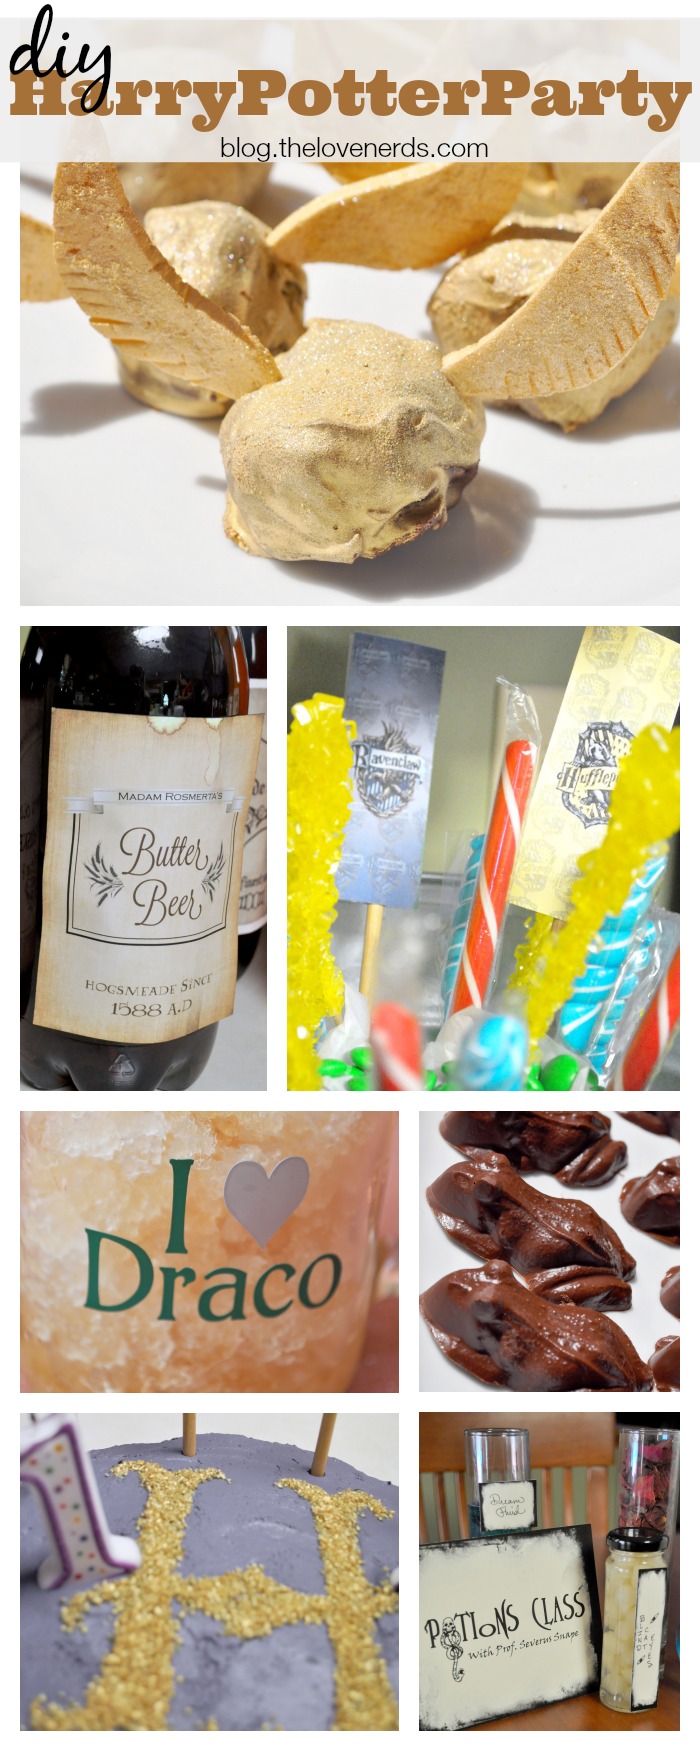 DIY Harry Potter Party - All details were created and implemented in 4 days! This is fun AND doable! {The Love Nerds}